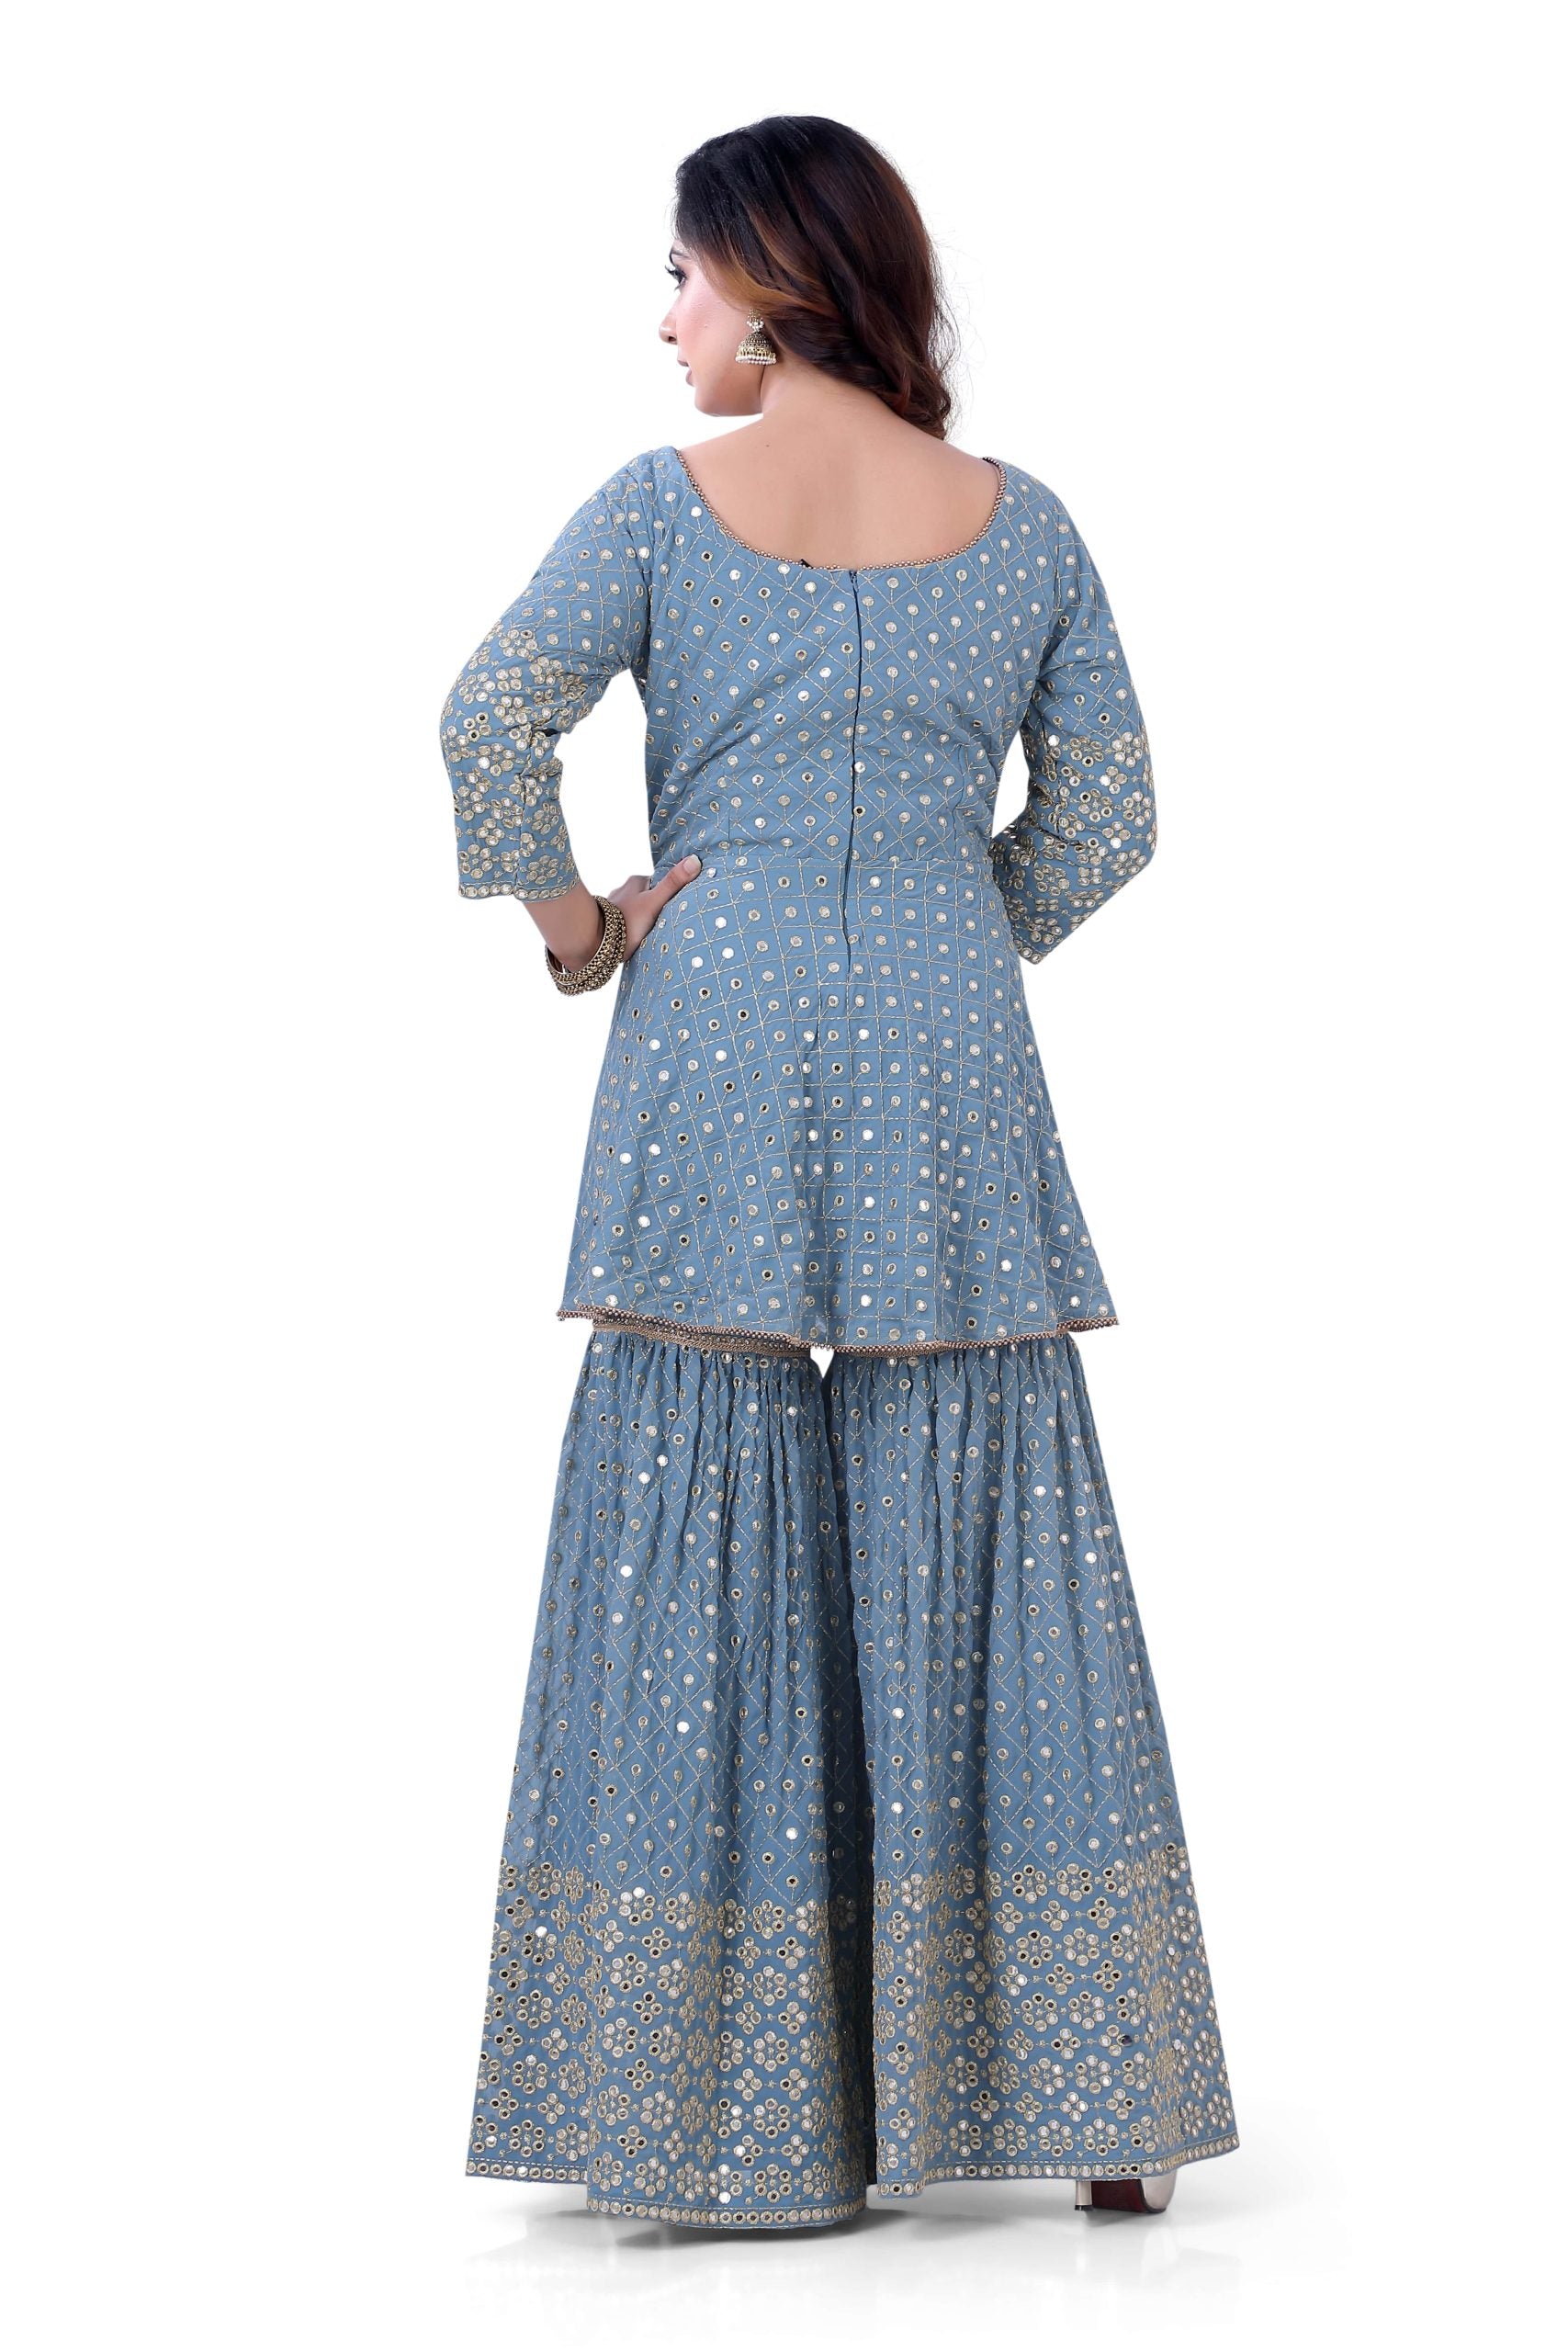 Dusty Blue Georgette Sharara Style Suit